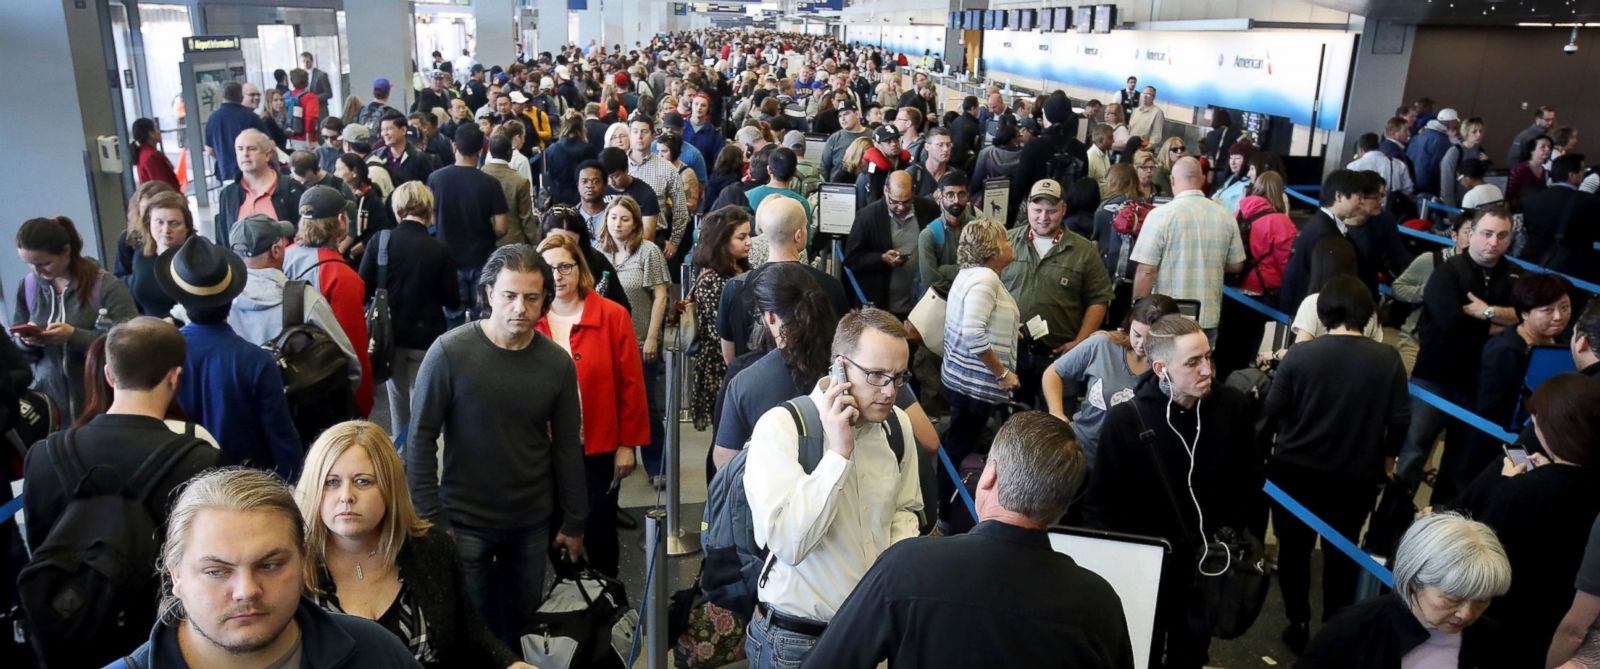 PHOTO: Passengers at OHare International Airport wait in line to be screened at a Transportation Security Administration (TSA) checkpoint, May 16, 2016, in Chicago.